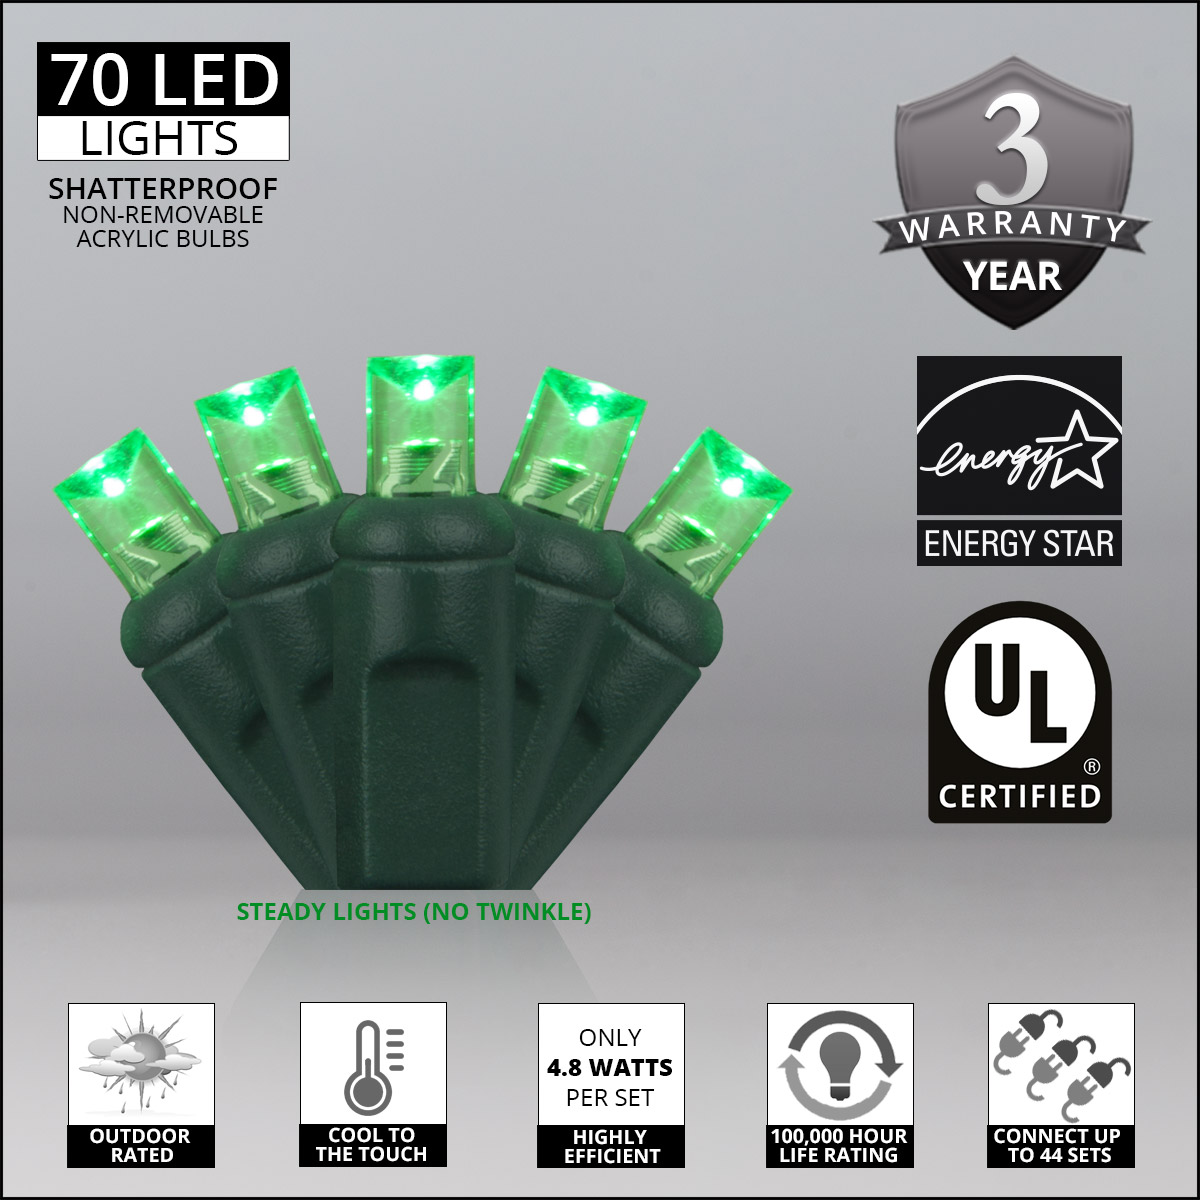 70 Green LED Christmas Lights, Long Life, Outdoor String Lights, Connectable, St. Patricks Day, Halloween, Christmas, Holidays, Party, Decoration, 24' Length, 4" Spacing - image 4 of 7